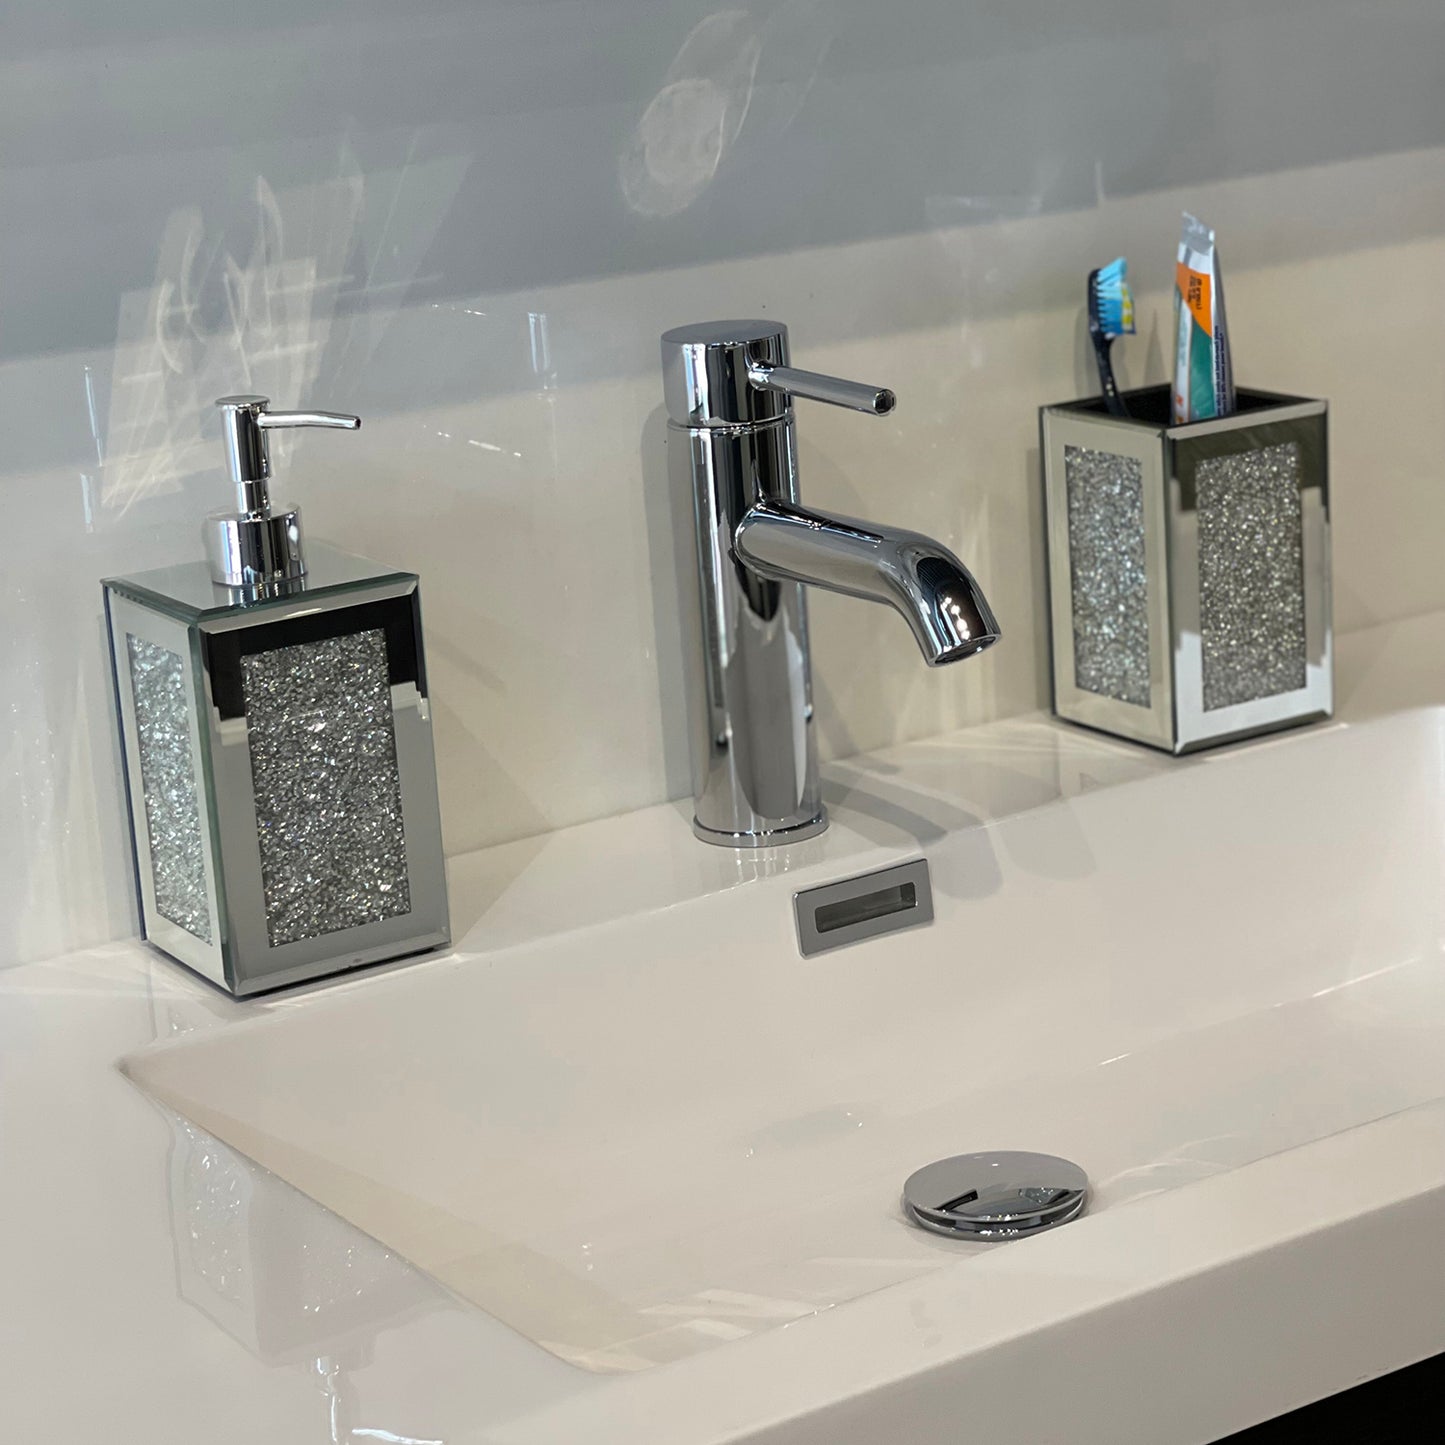 Ambrose Exquisite 2 Piece Square Soap Dispenser and Toothbrush Holder Bathroom Accessories